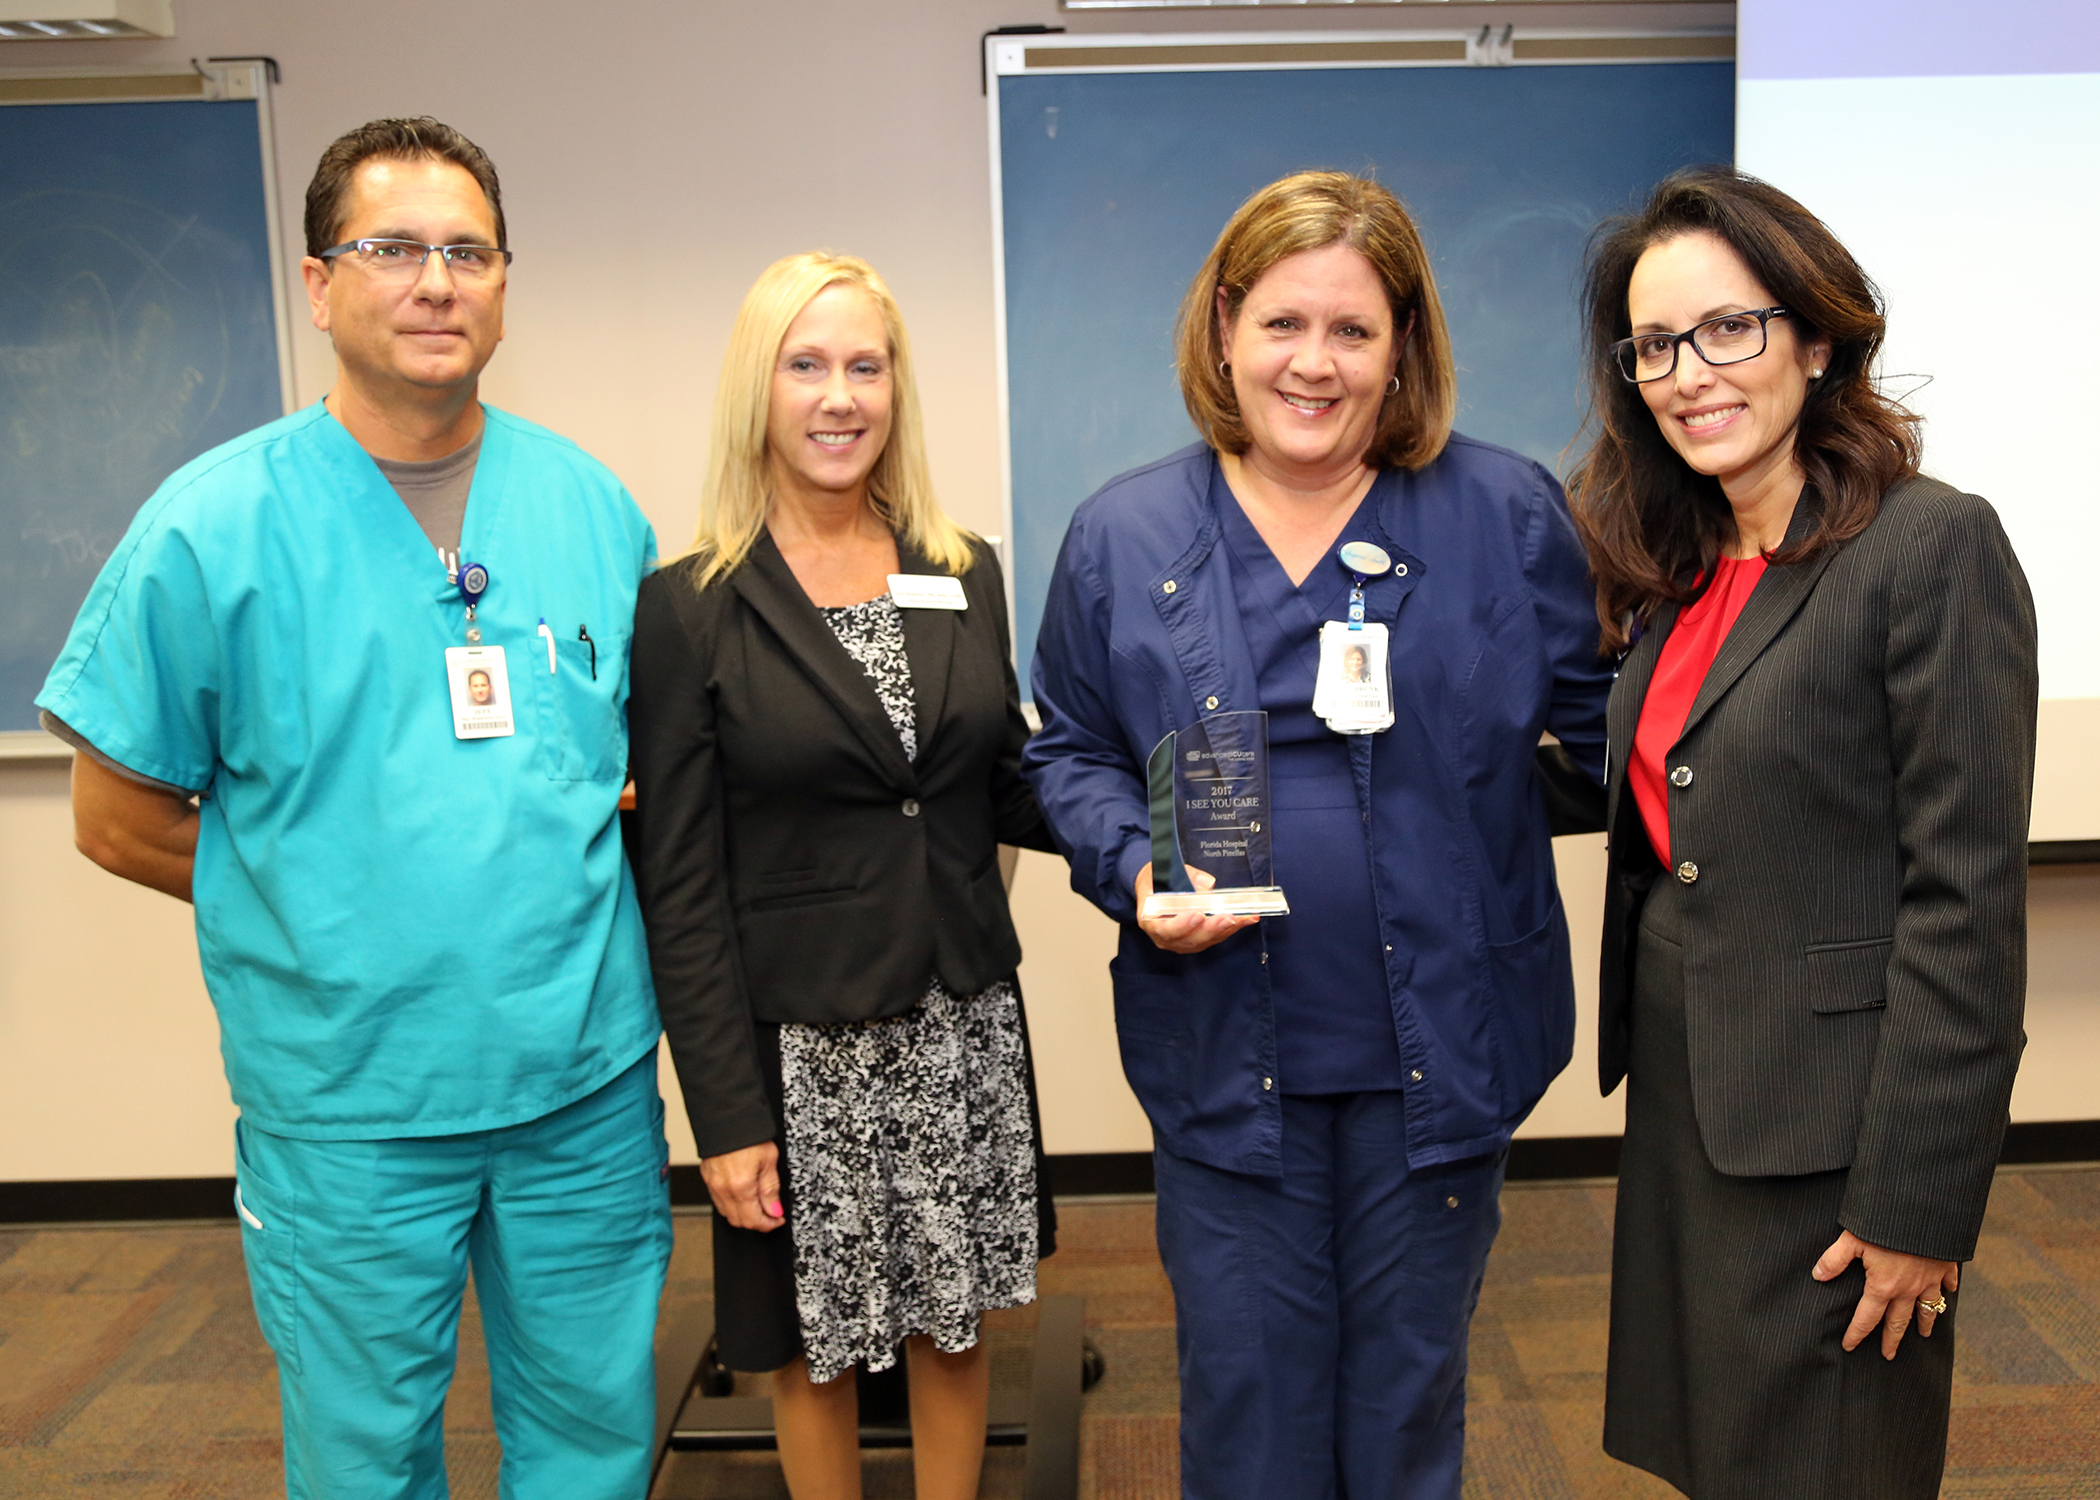 Jeff Arrendale, Manager, Respiratory Services, Lisa Stephen, Senior Account Manager, Advanced ICU Care, Lynn Brunk, Director Critical Care Unit and Progressive Care Unit and Tricia Williams